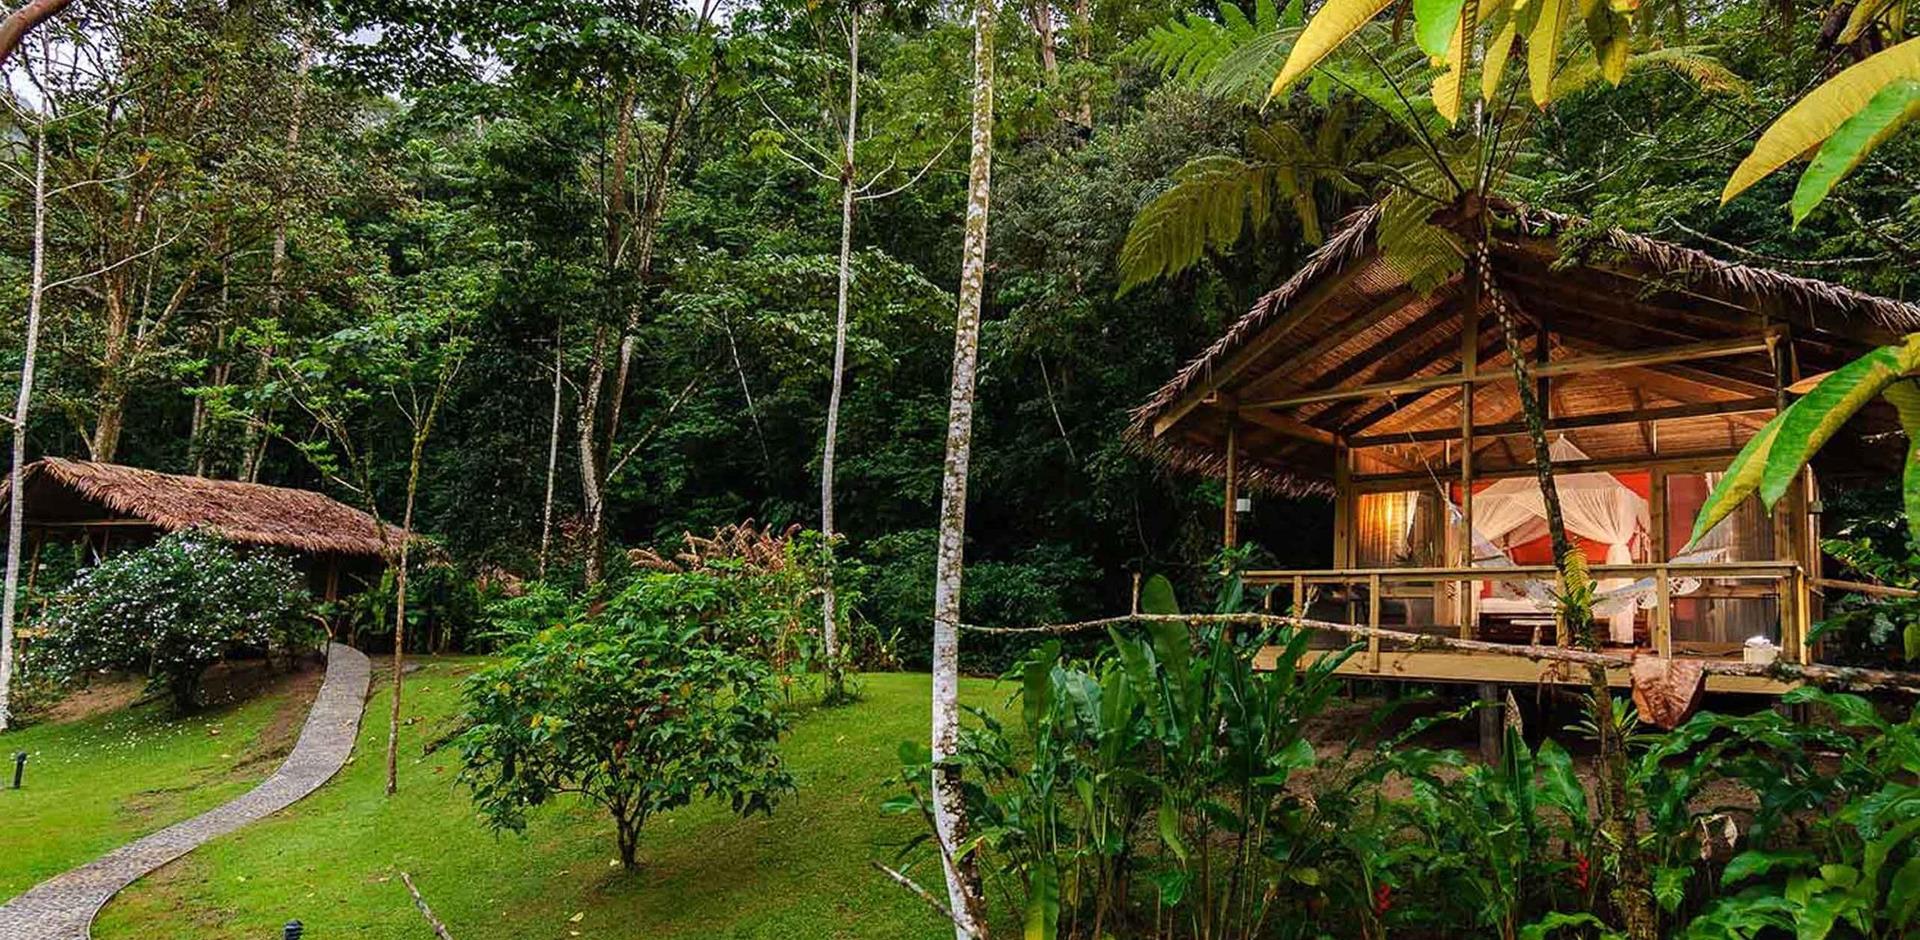 Outdoor, Pacuare Lodge, Costa Rica